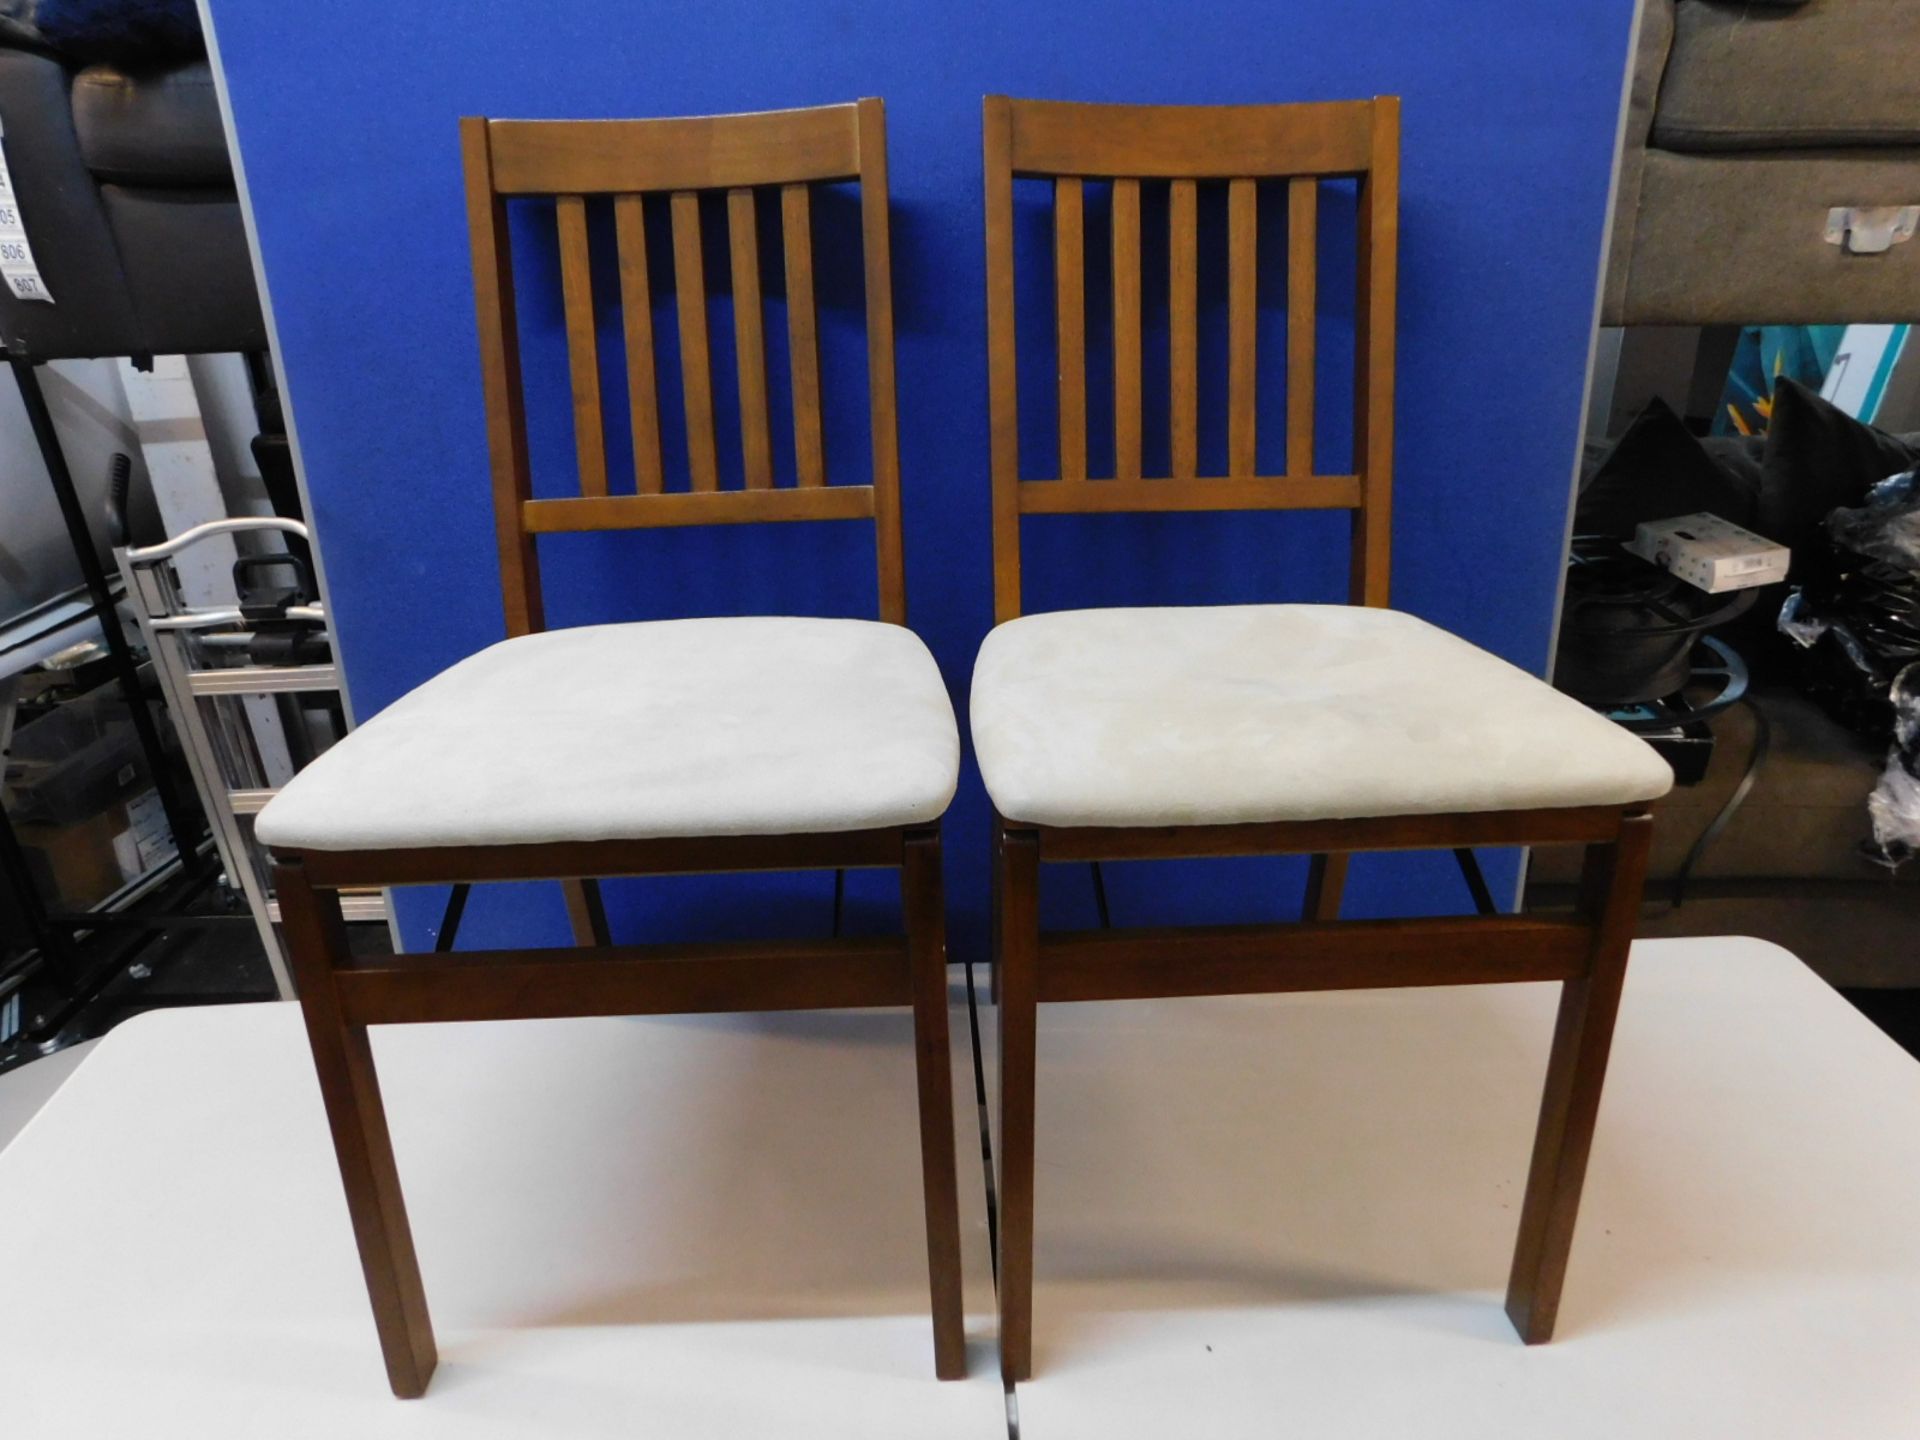 2 STAKMORE SOLID WOOD FOLDING CHAIR WITH PADDED SEAT RRP Â£89